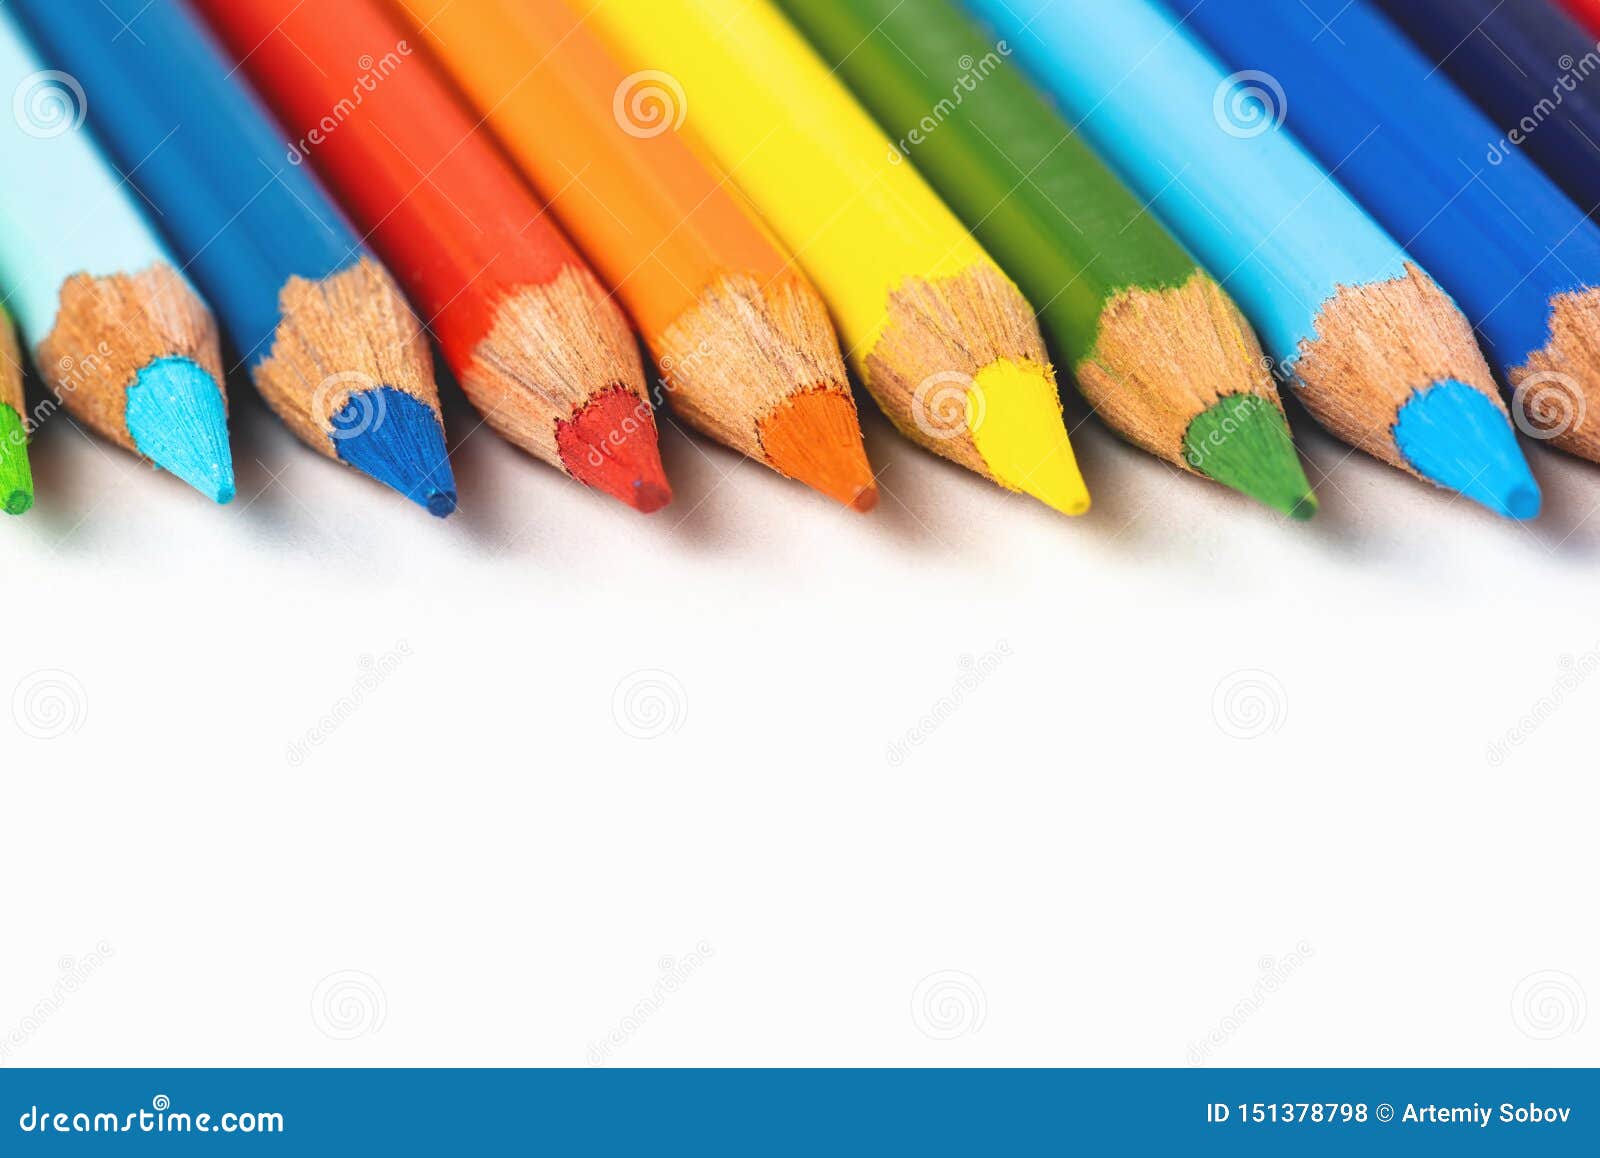 Set Of Colored Pencils. Colors Of Rainbow. Colored Pencils For Drawing